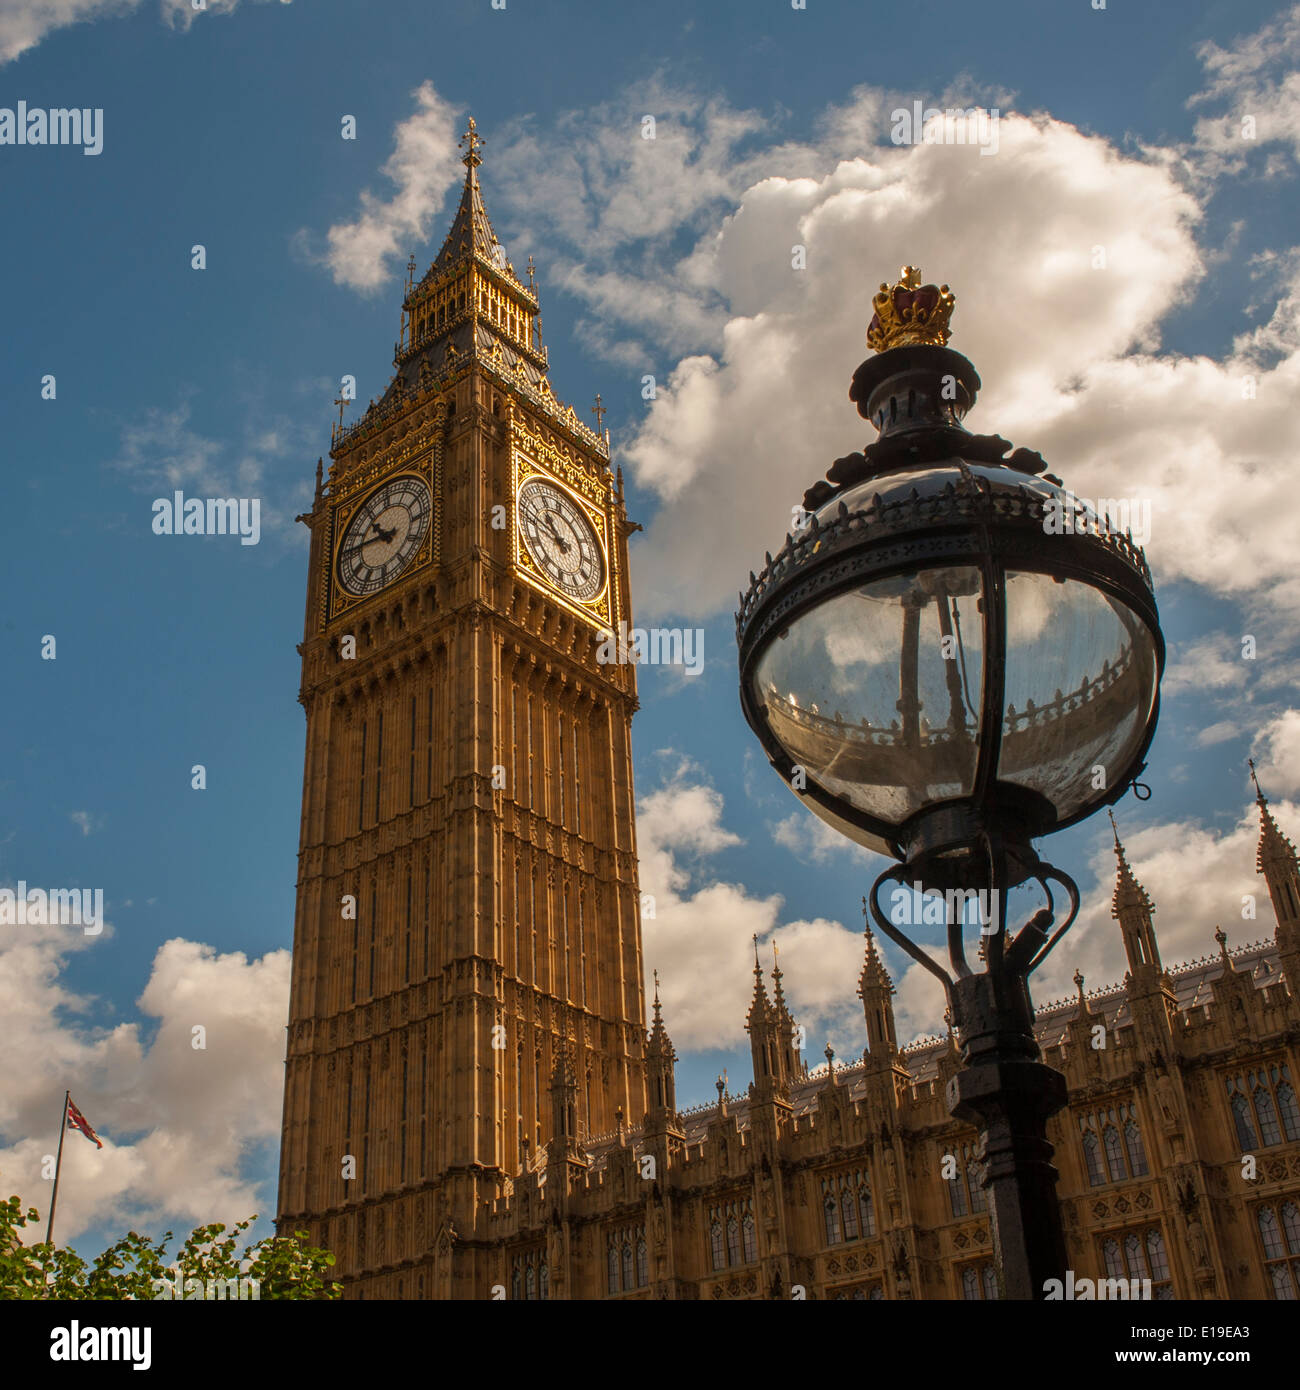 Elizabeth tower and Big Ben from New palace yard. Houses of parliament London. Stock Photo